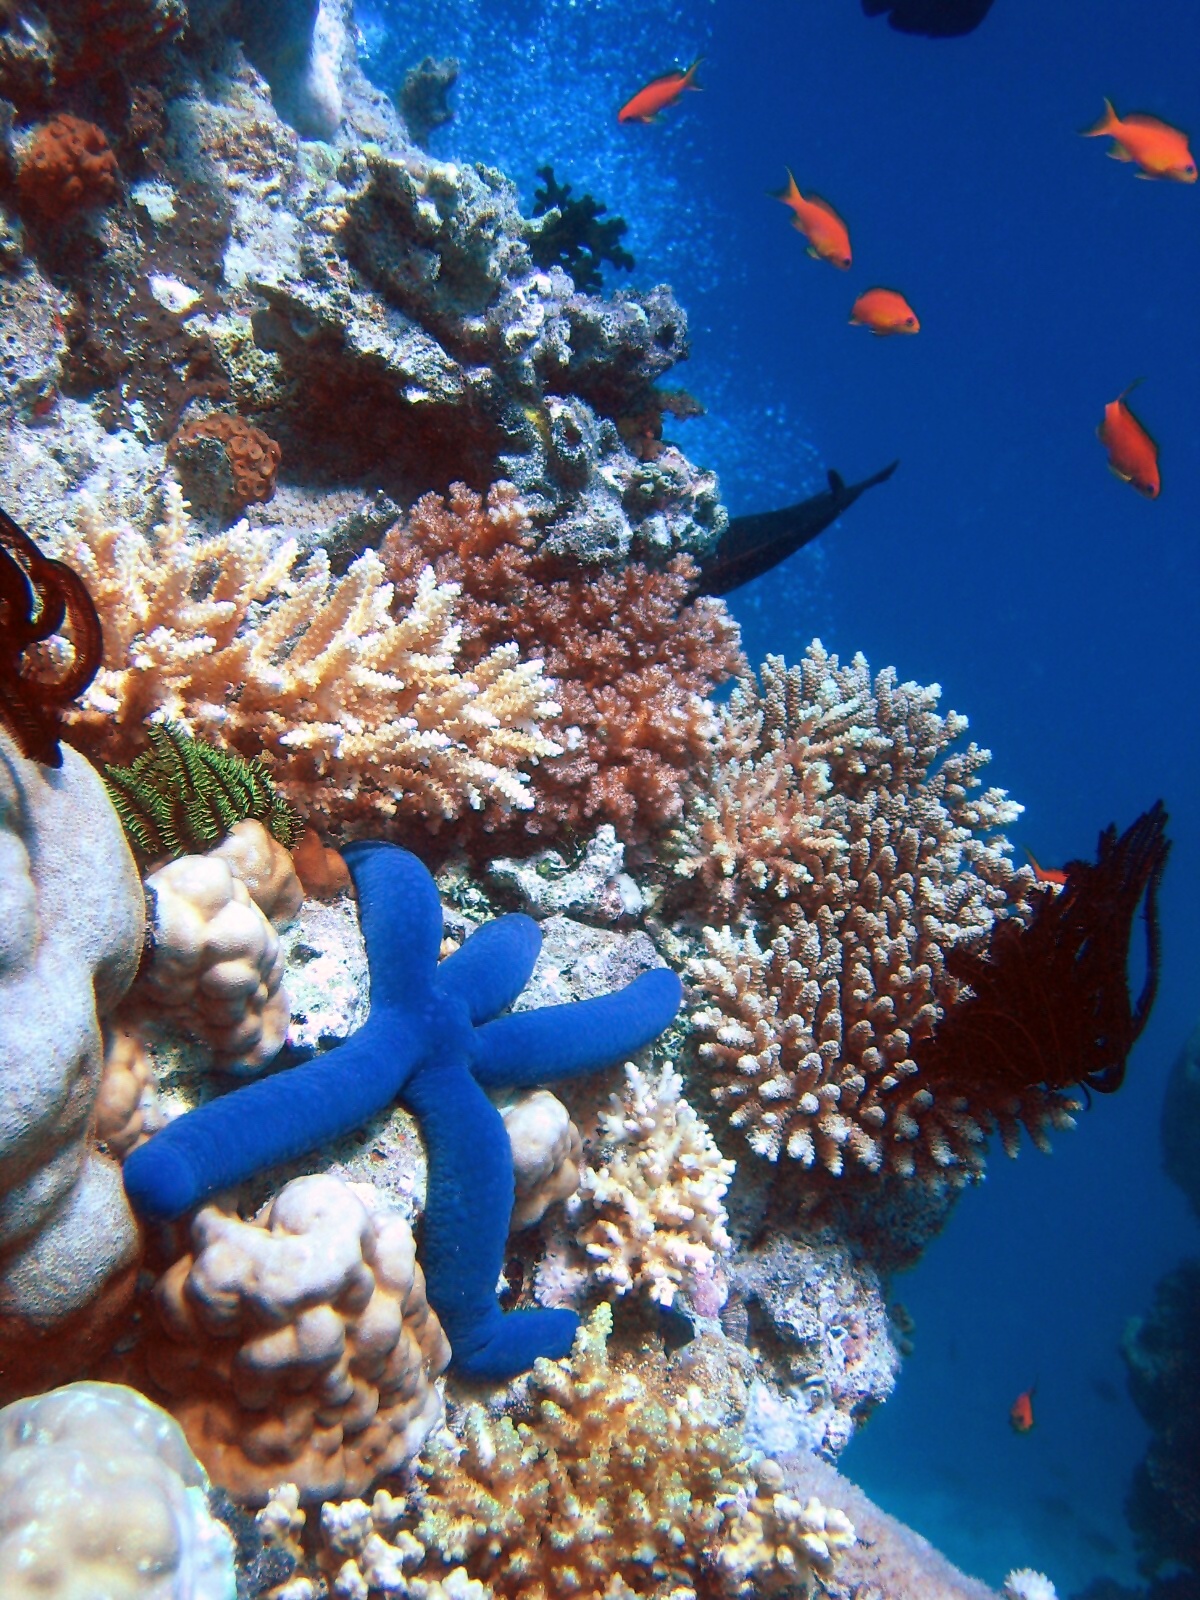 Starfish on coral, Great Barrier Reef